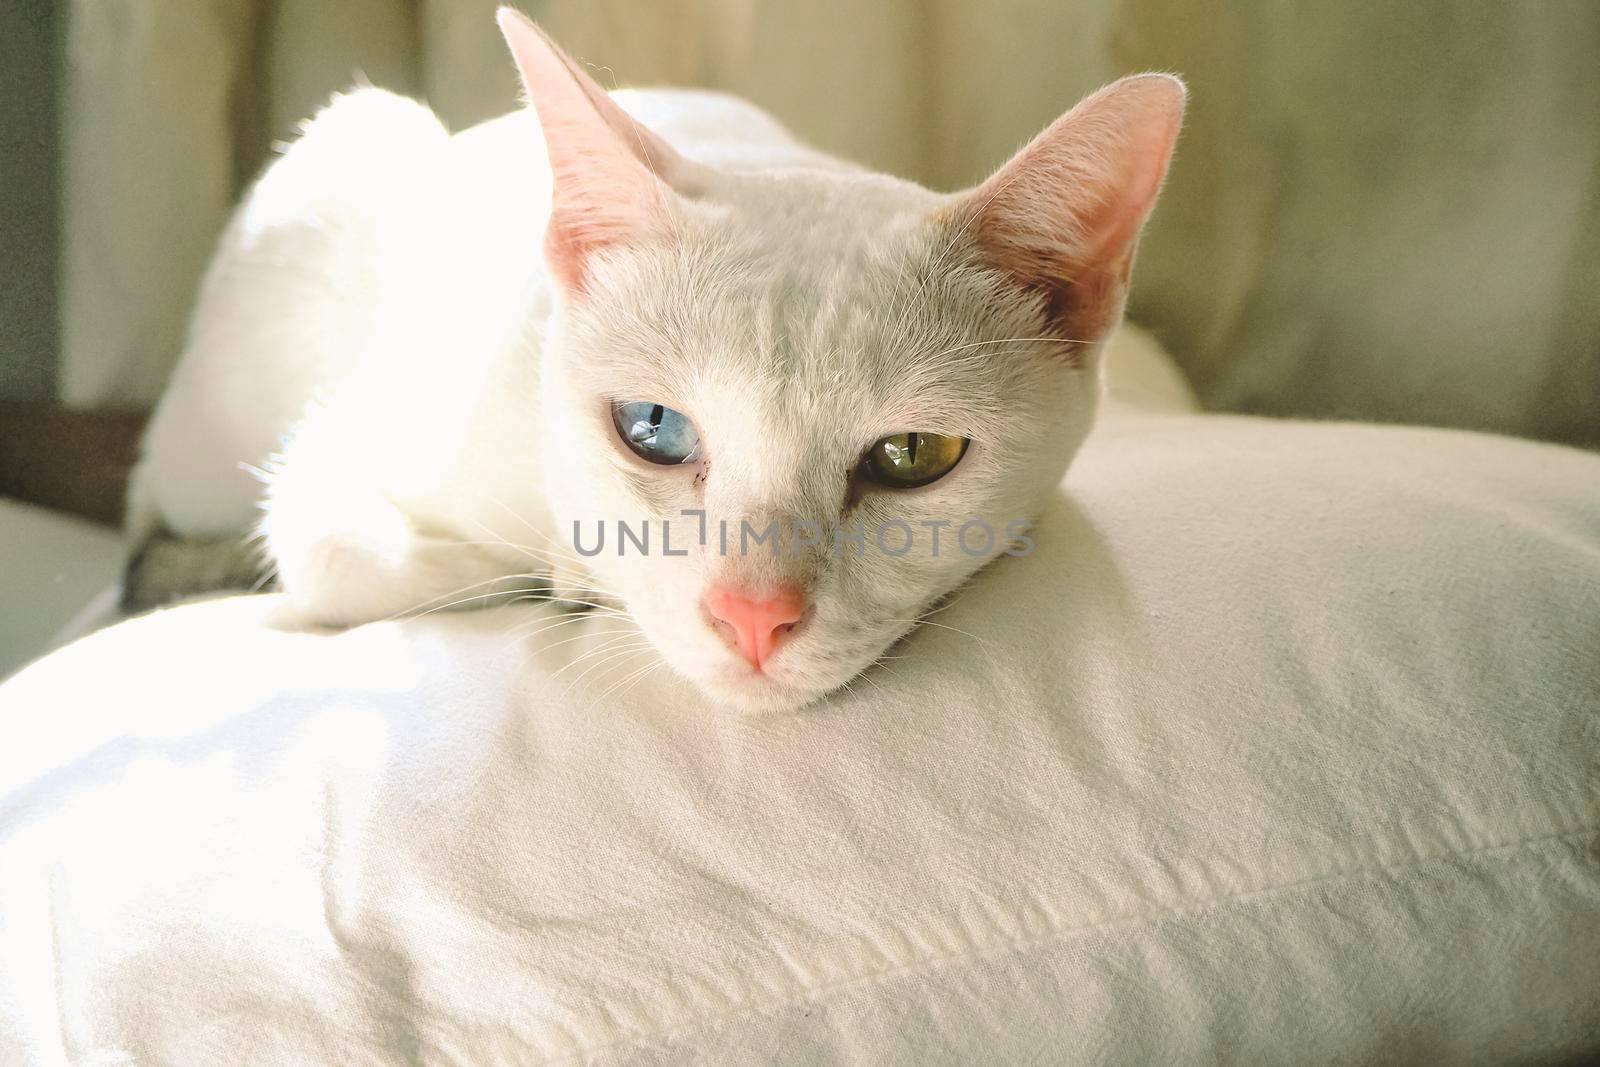 cute white cat with blue and yellow eyes sleeping on pillow in bedroom . home concept idea . adopt animal idea backgroud by Petrichor